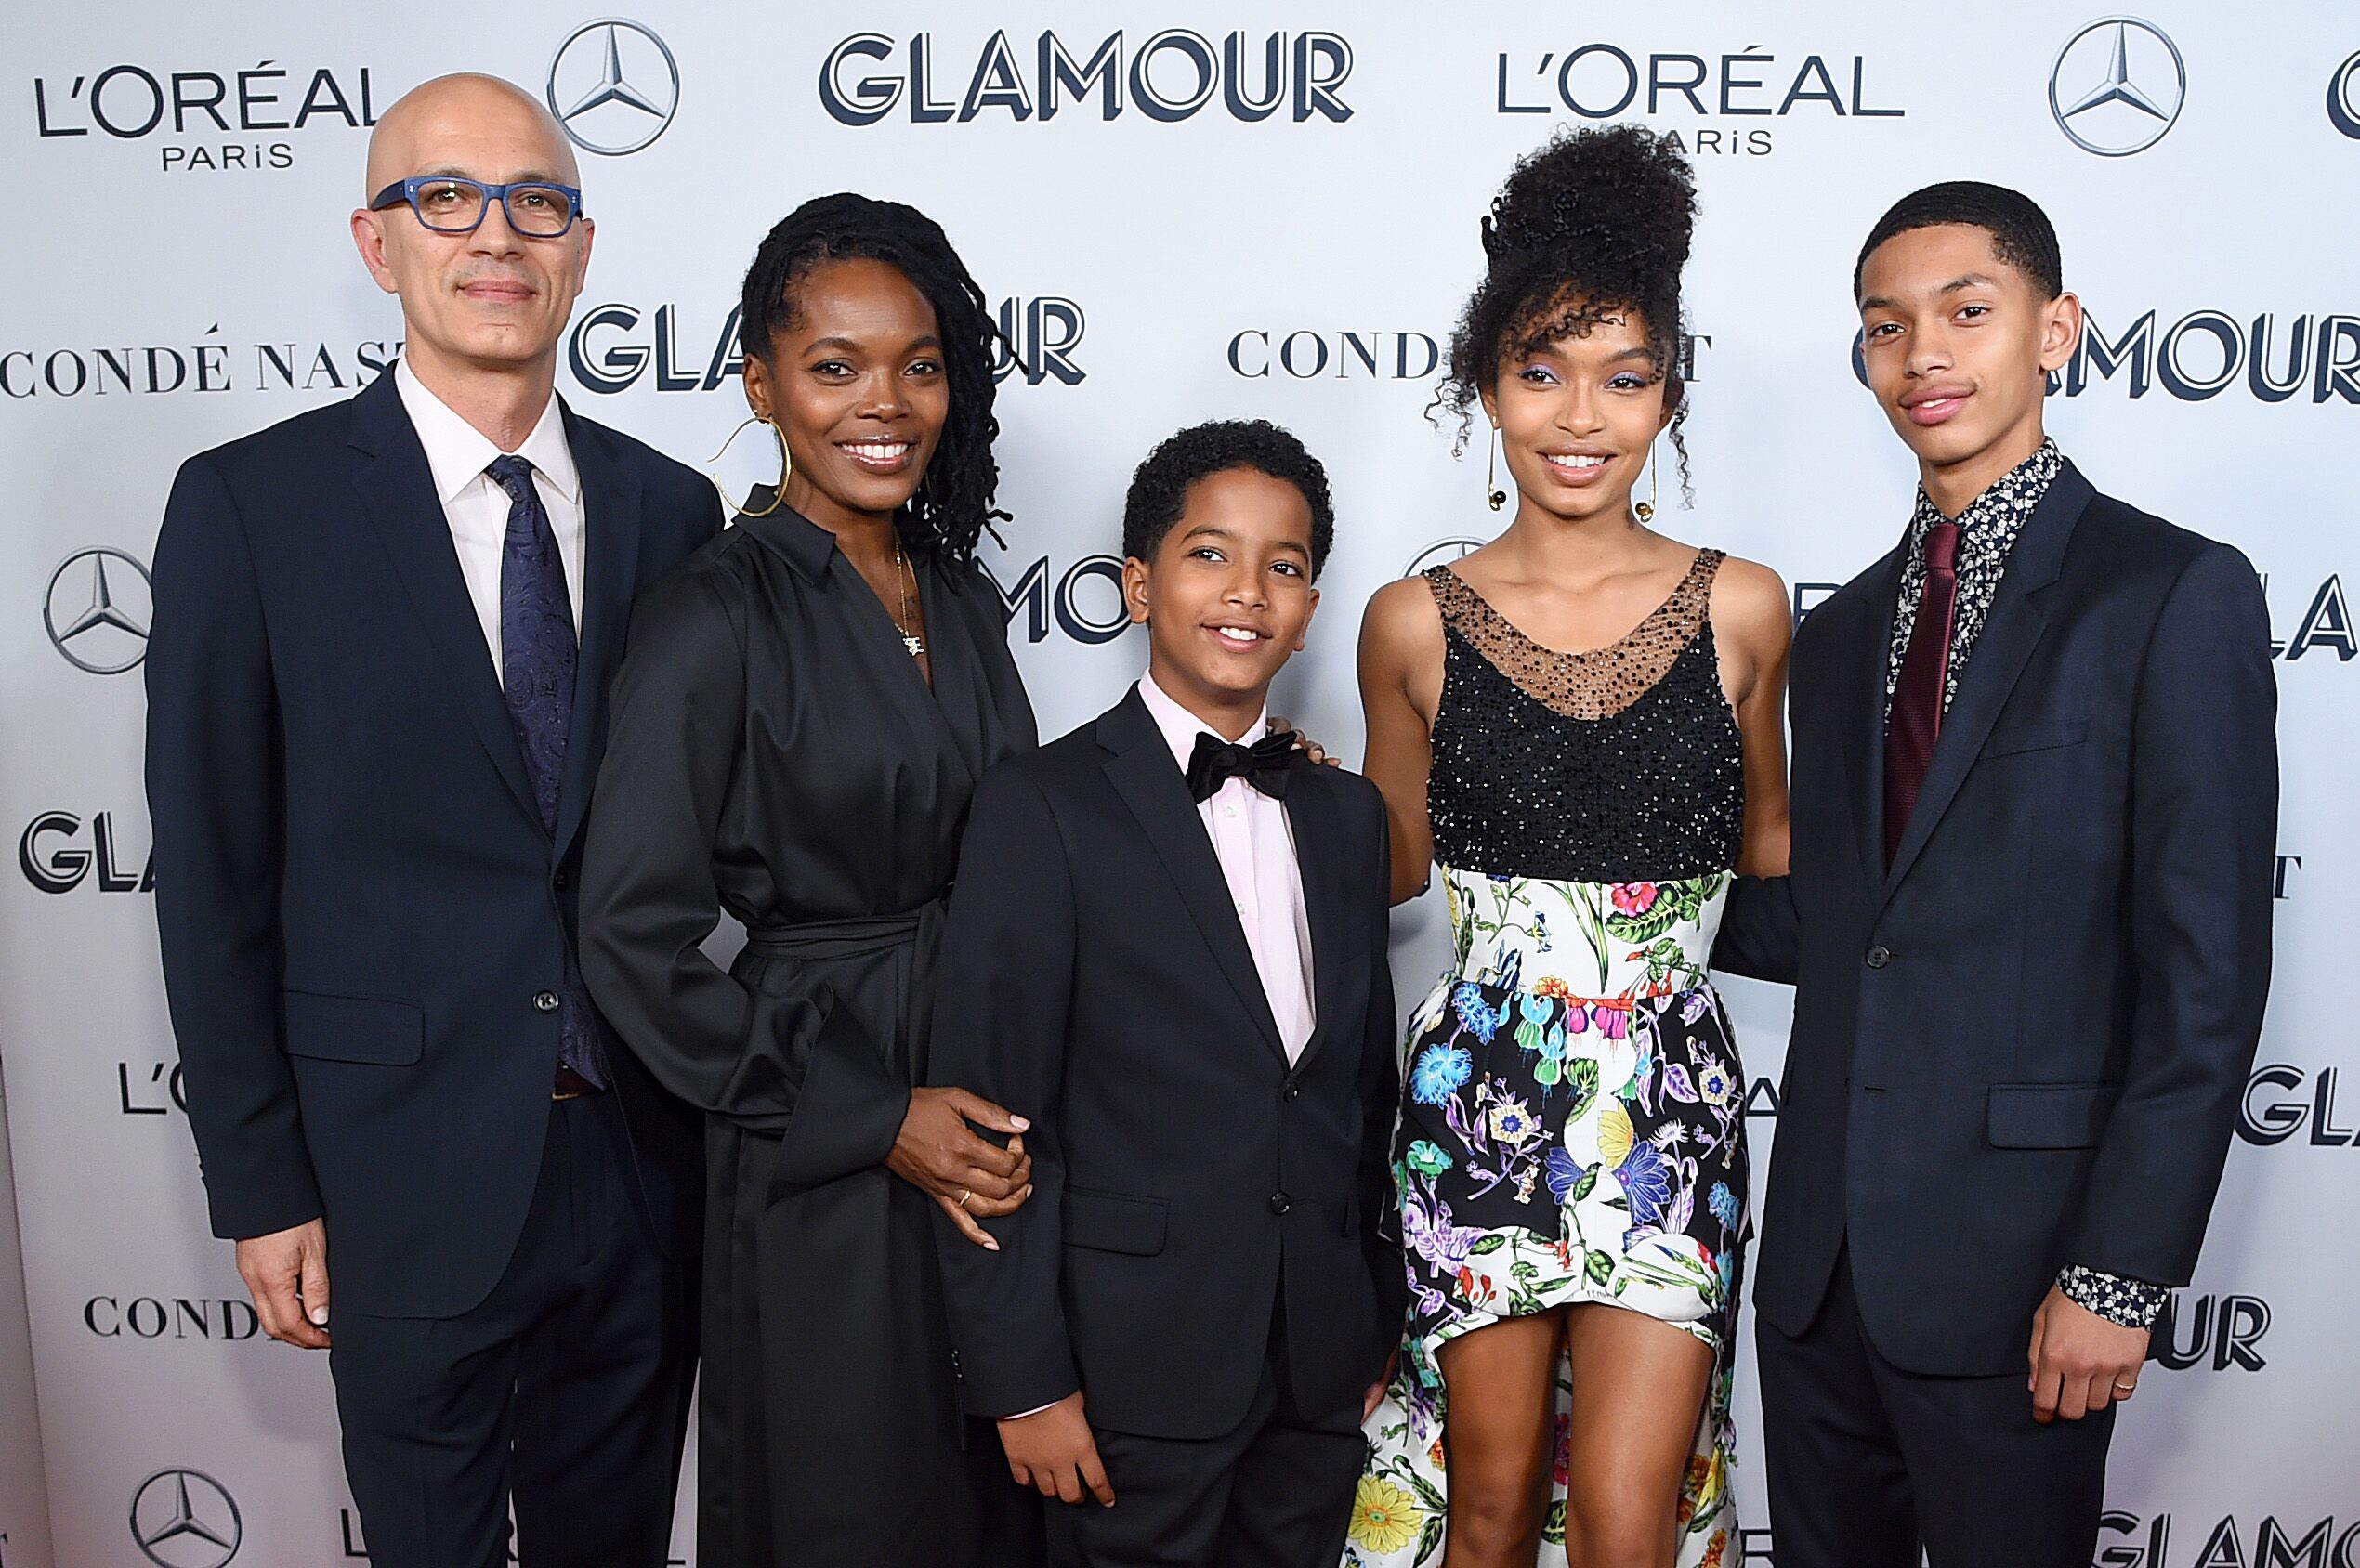 Yara Shahidi  at the 2019 Glamour Women of the Year Awards with her family / Source: Getty Images